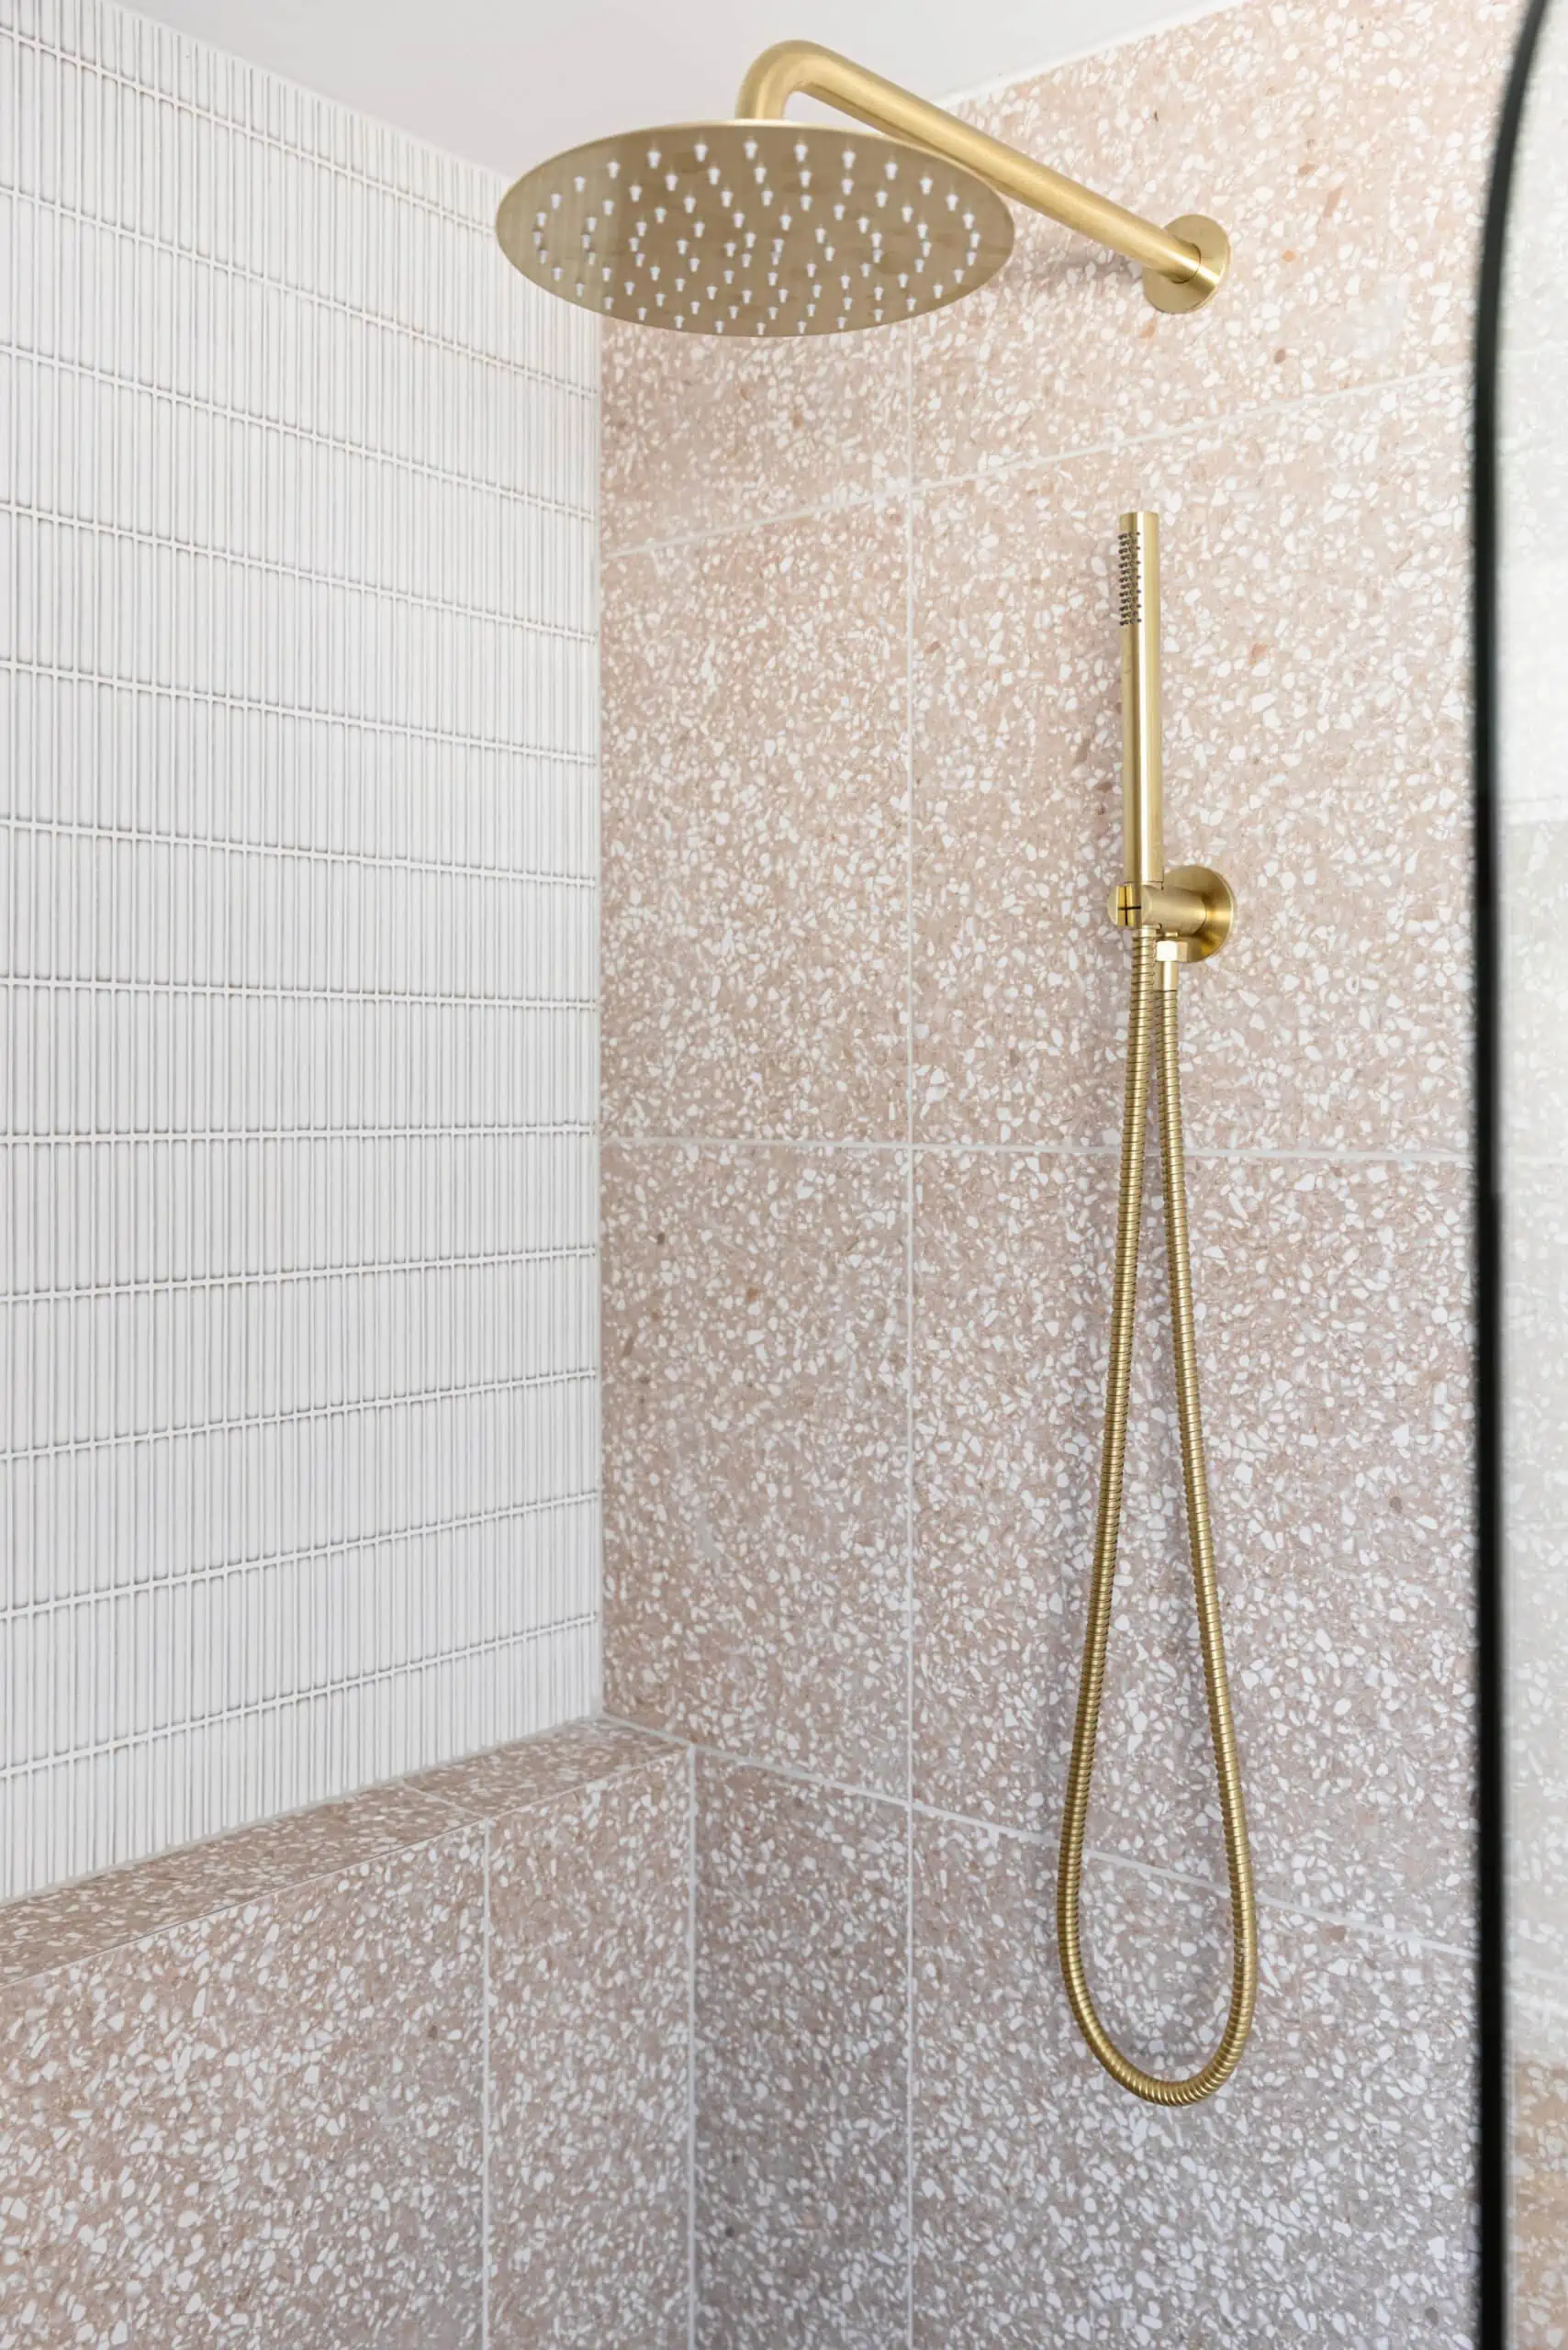 Gold shower accessories and pink granite tiles.